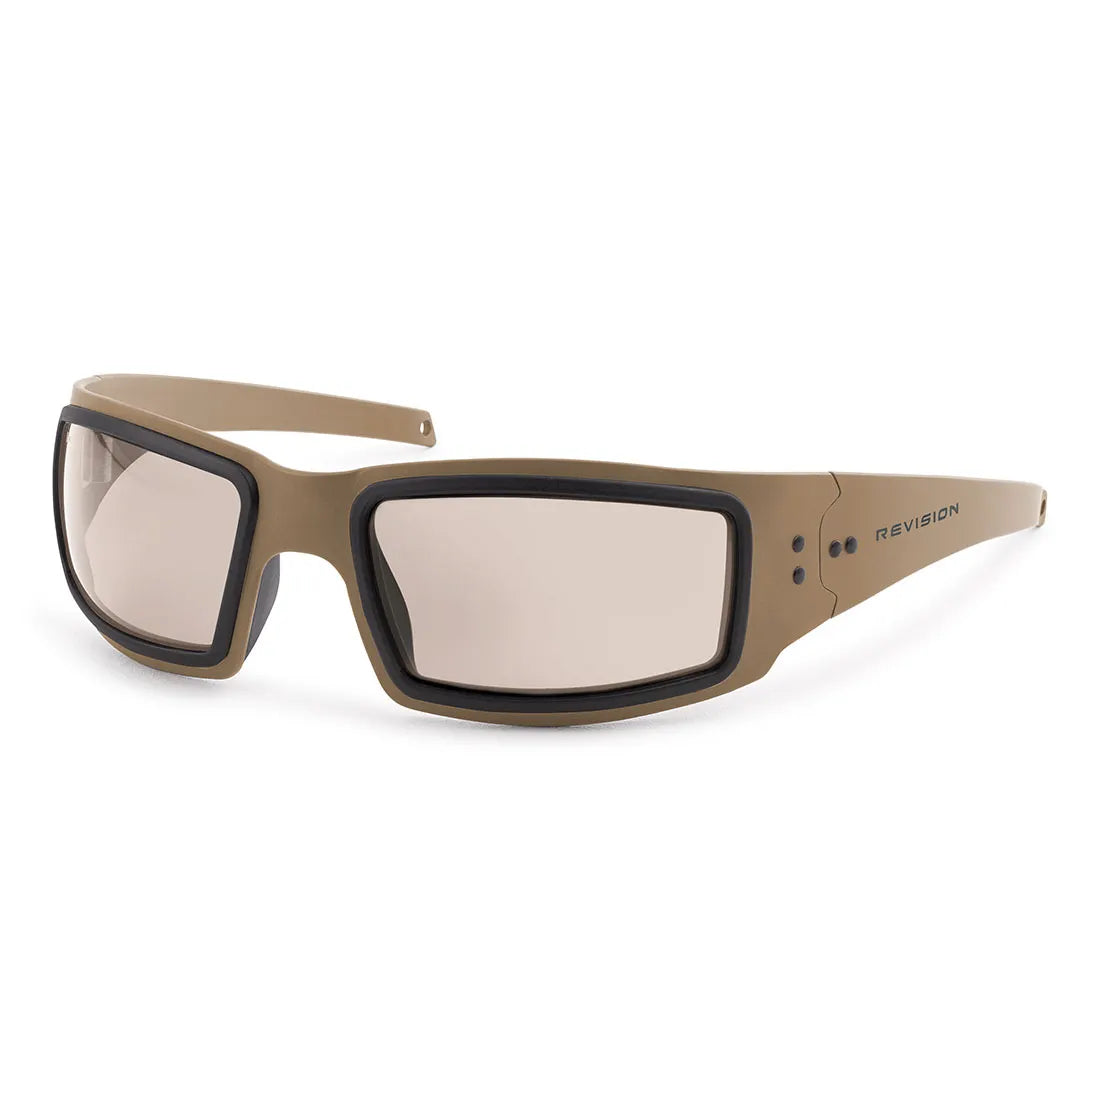 Revision Unveils SlingShot Ballistic Sunglasses - Soldier Systems Daily